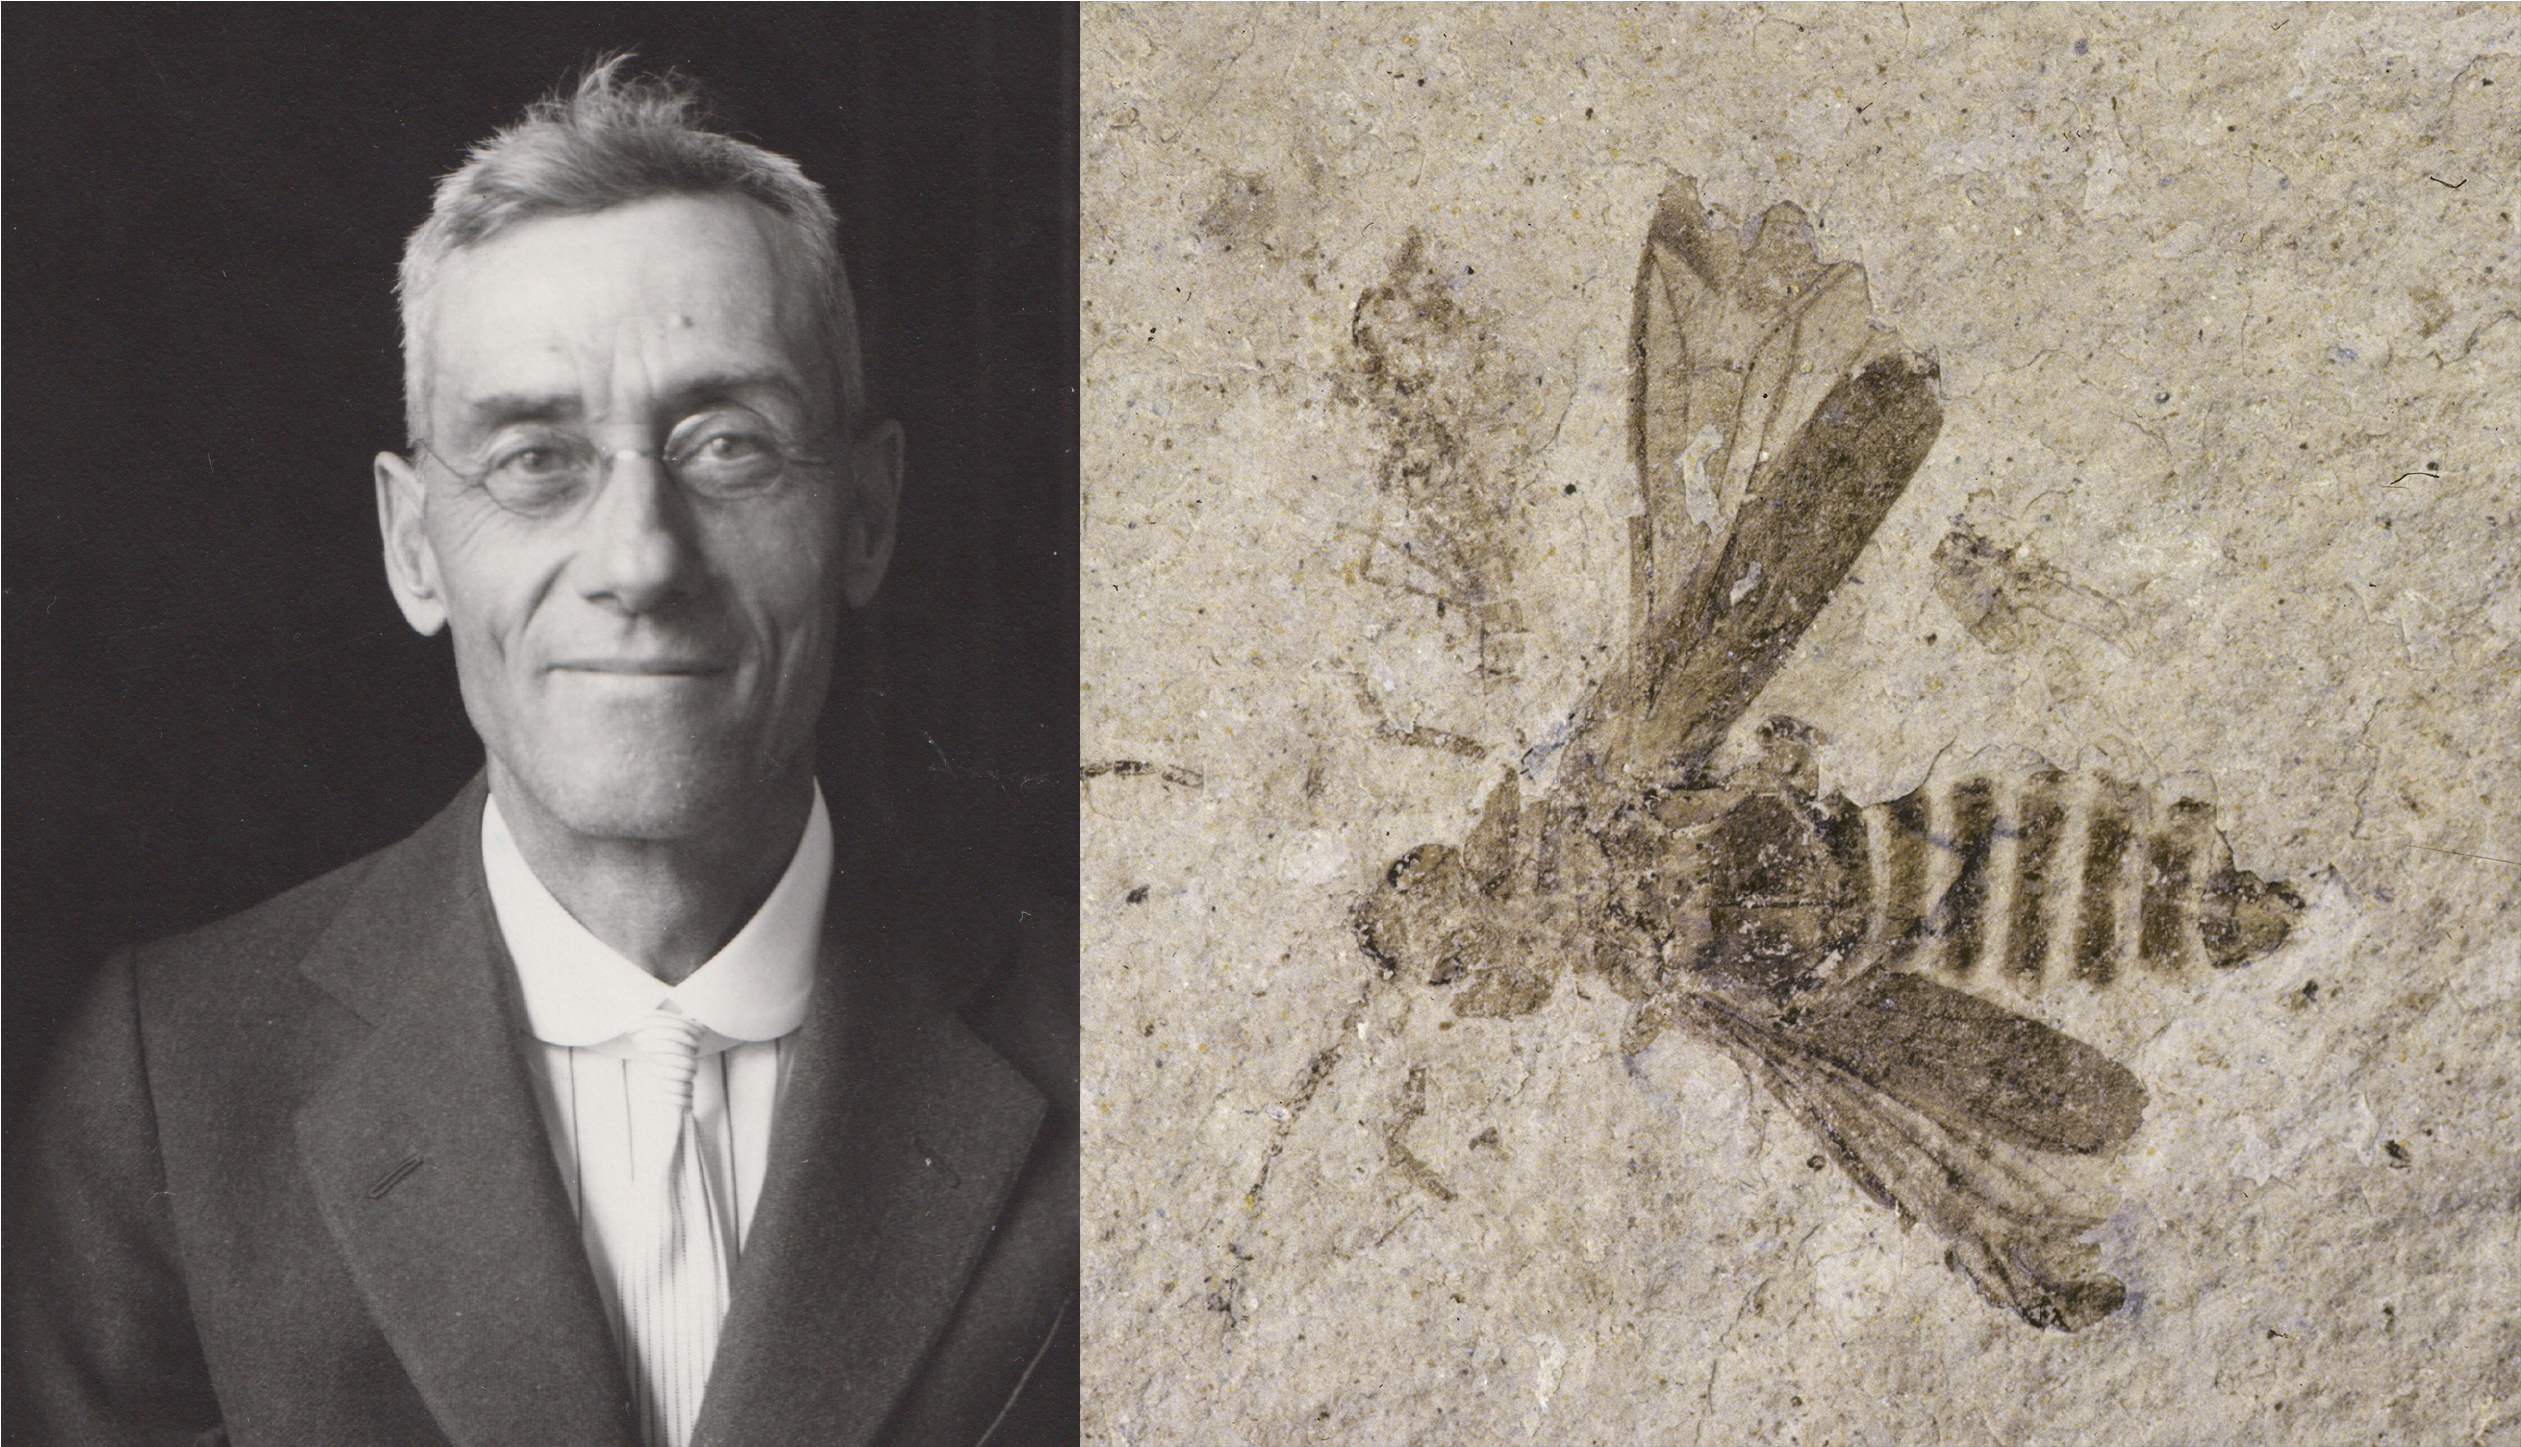 A smiling man in glasses on the left with a fossil insect on the right.